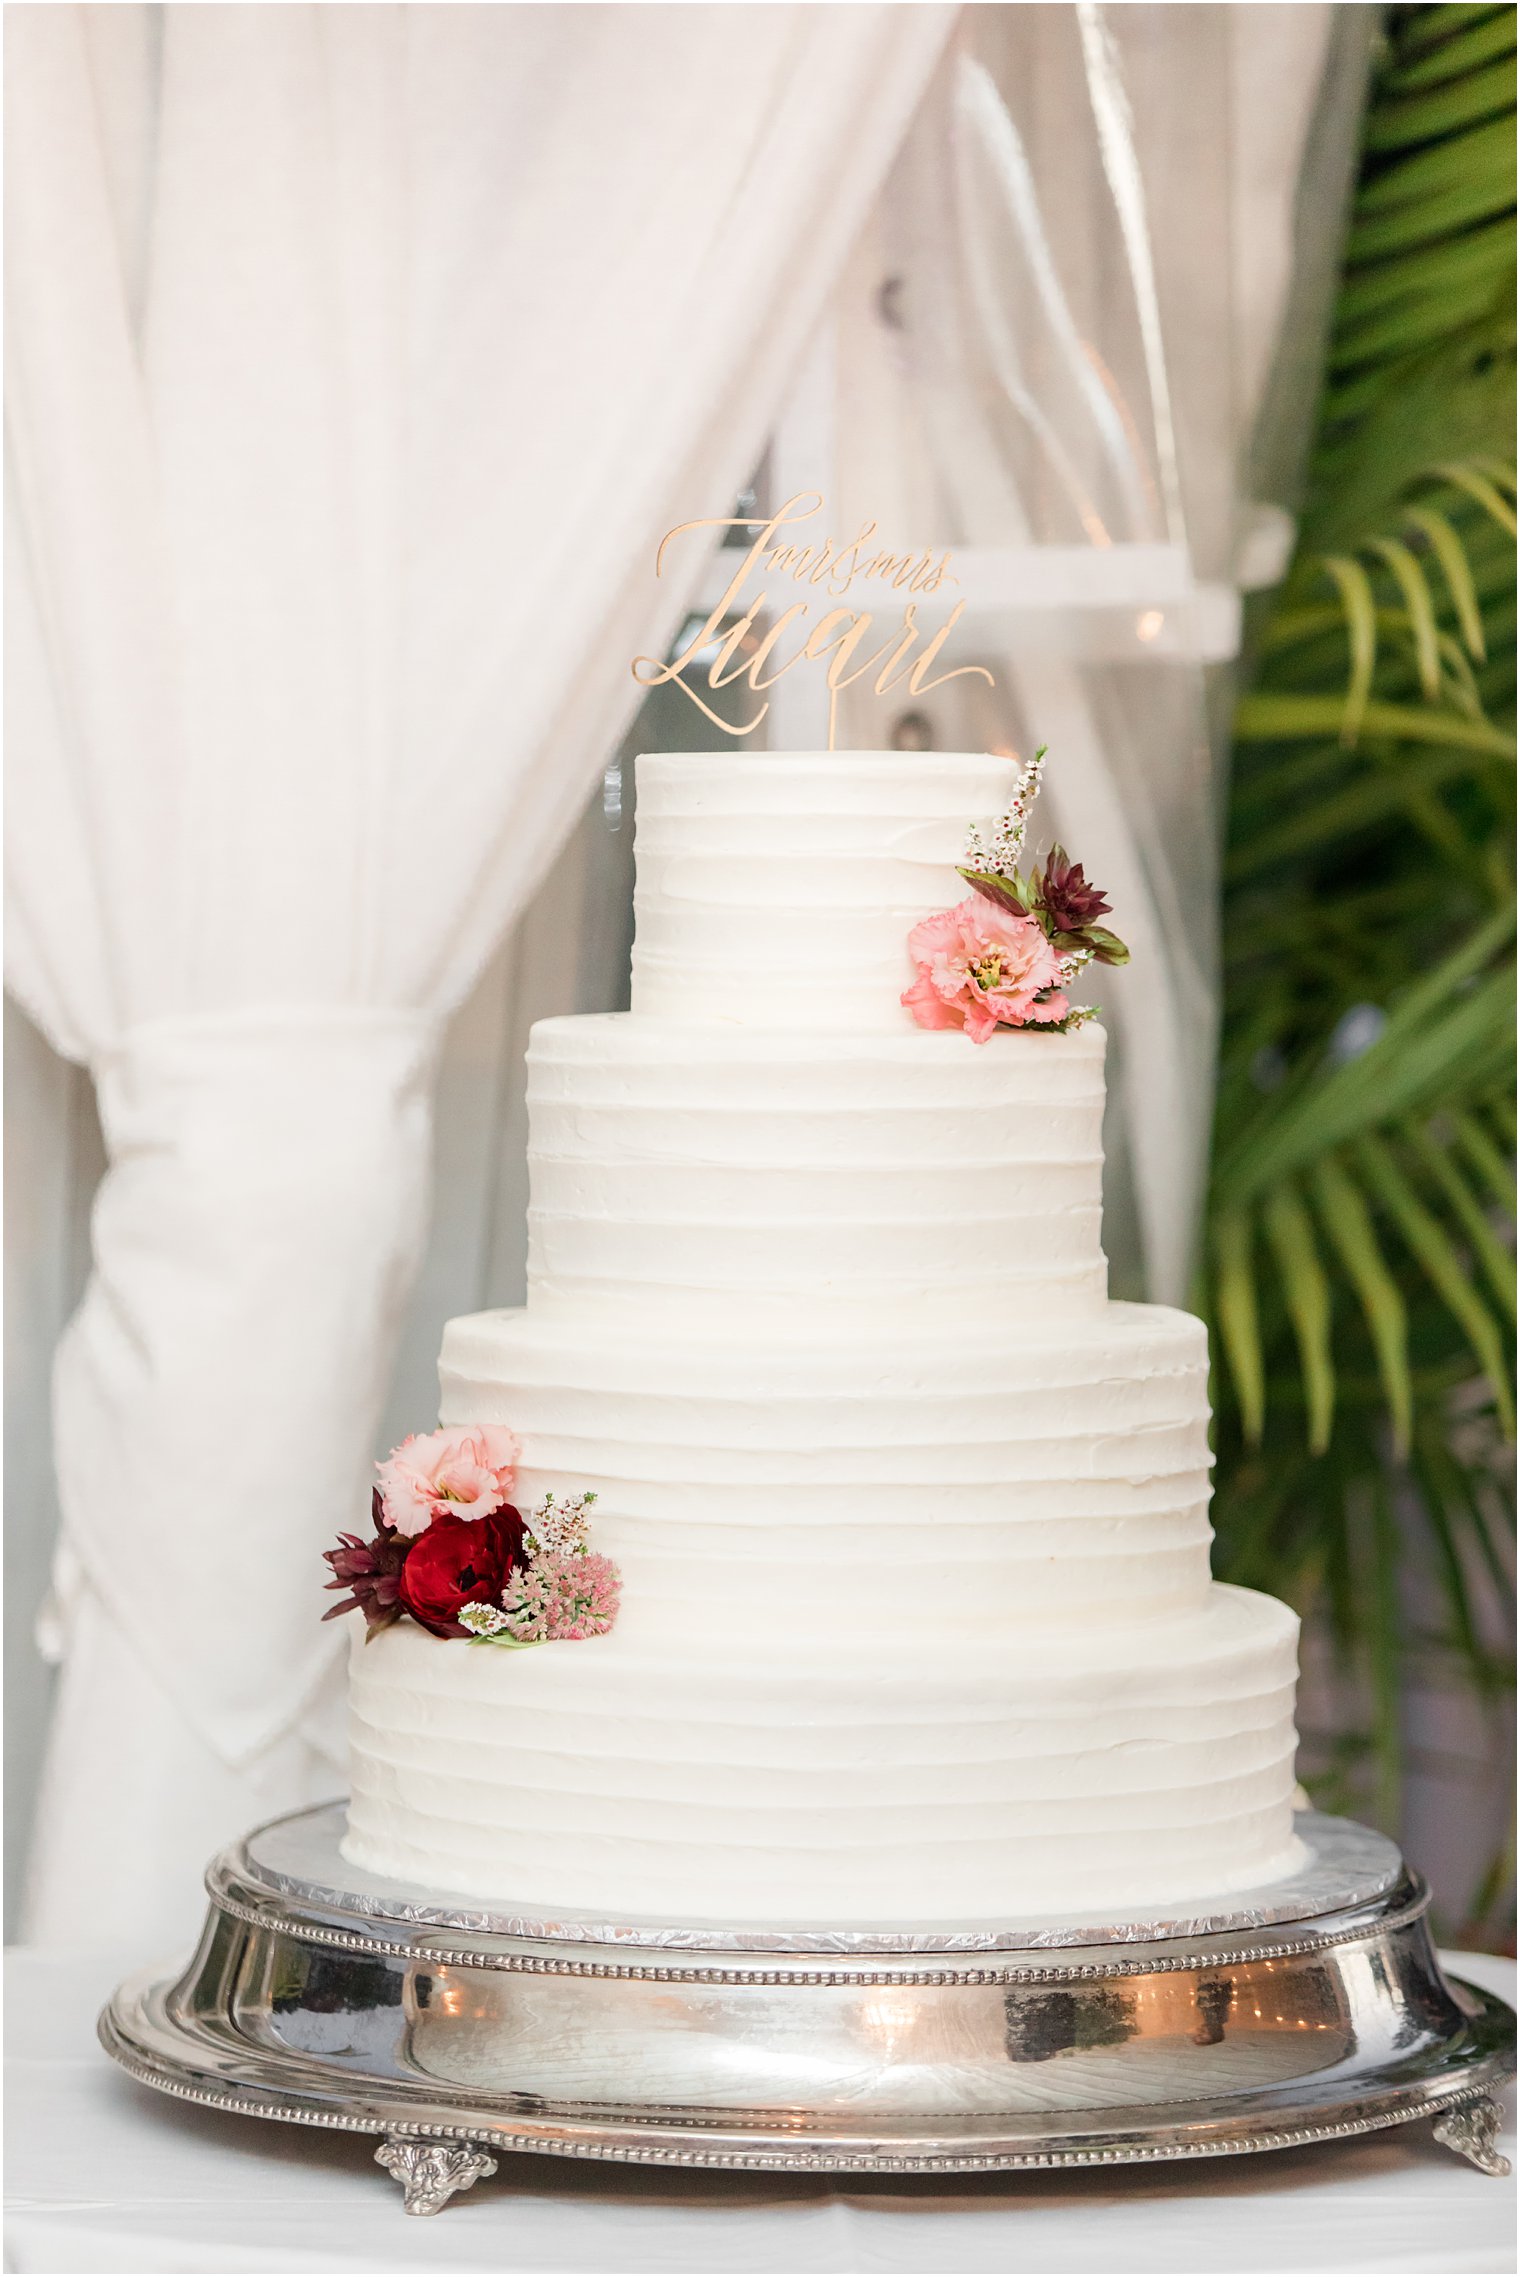 tiered wedding cake for Windows on the Water at Frogbridge wedding reception